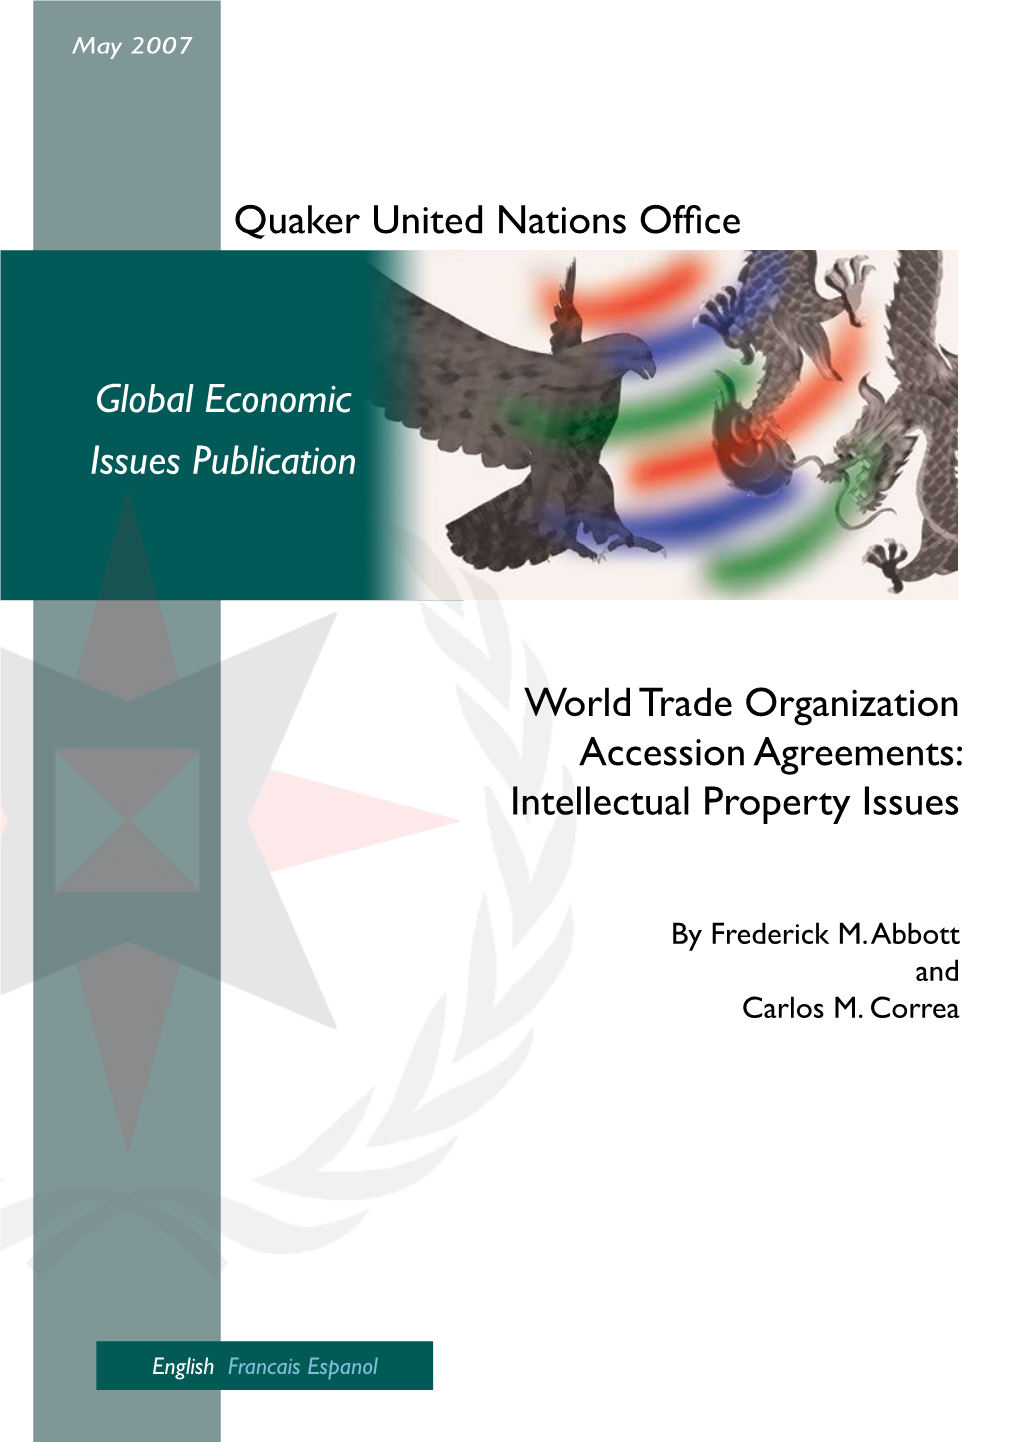 World Trade Organization Accession Agreements: Intellectual Property Issues